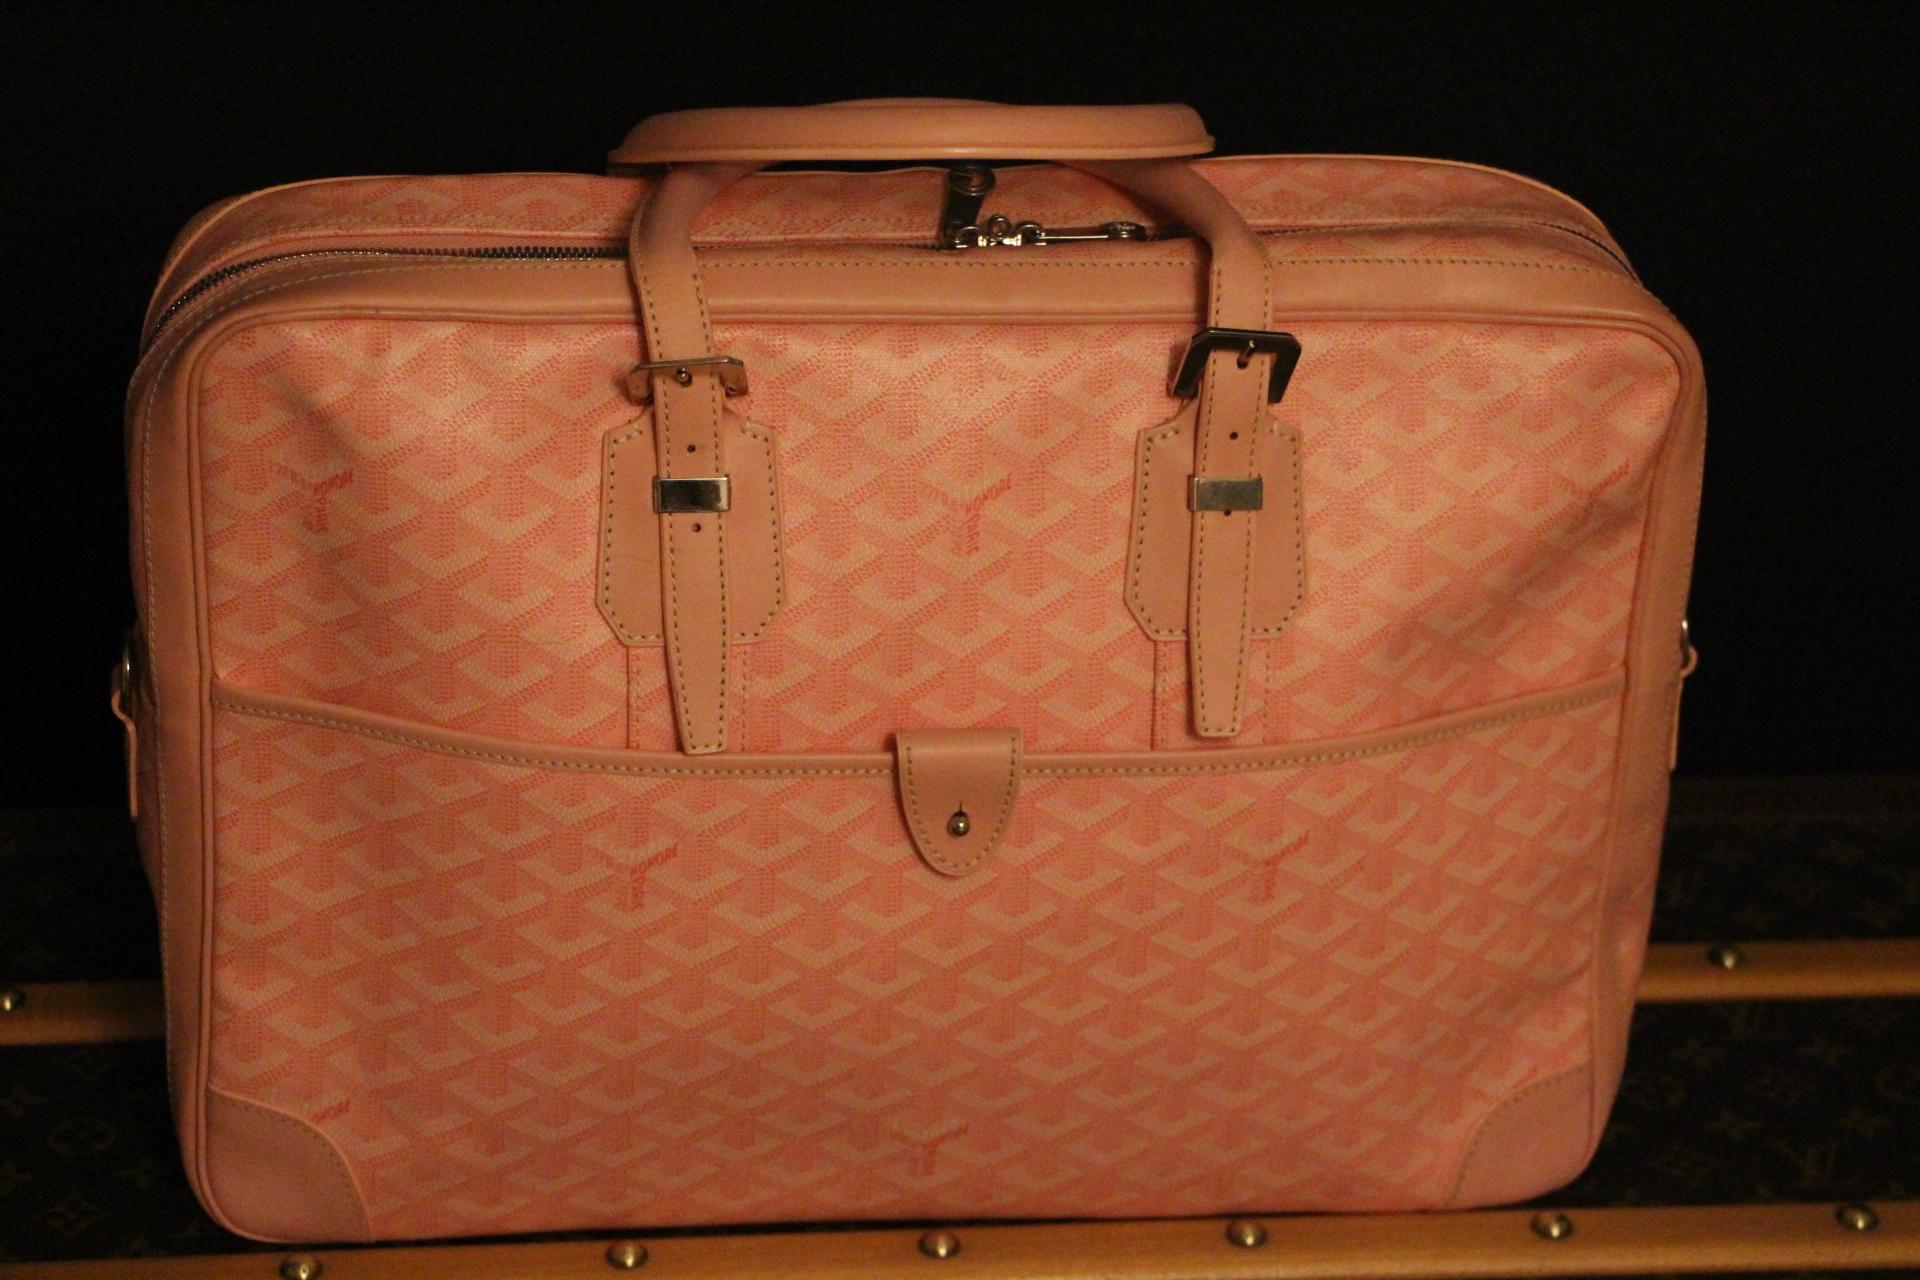  This Goyard pink chevron bag features the very famous Goyard canvas, palladium-plated hardware, dual rolled leather top handles, single slit pocket at front, pink leather trim, protective feet at base, marigold canvas lining, dual pockets at